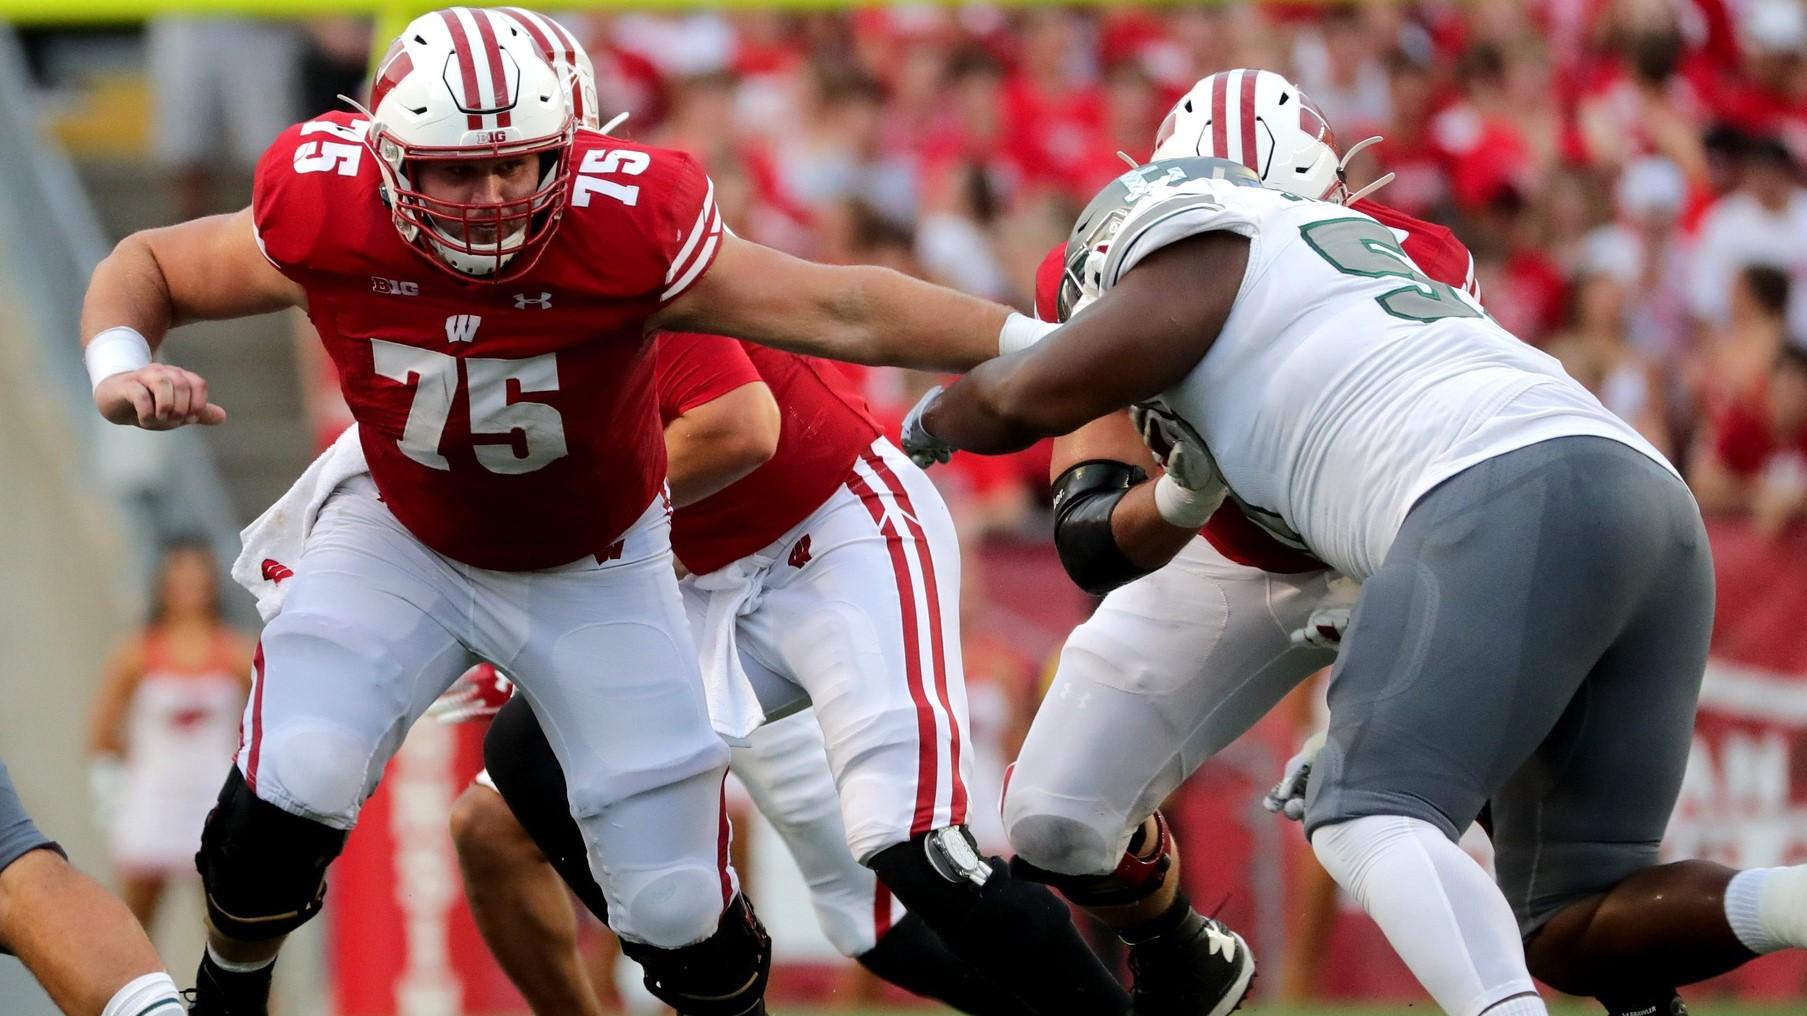 Wisconsin offensive lineman Joe Tippmann (75) looks for someone to block during the first quarter of their game against Eastern Michigan Saturday, September 11, 2021 at Camp Randall Stadium in Madison, Wis. / MARK HOFFMAN/MILWAUKEE JOURNAL SENTINEL via Imagn Content Services, LLC